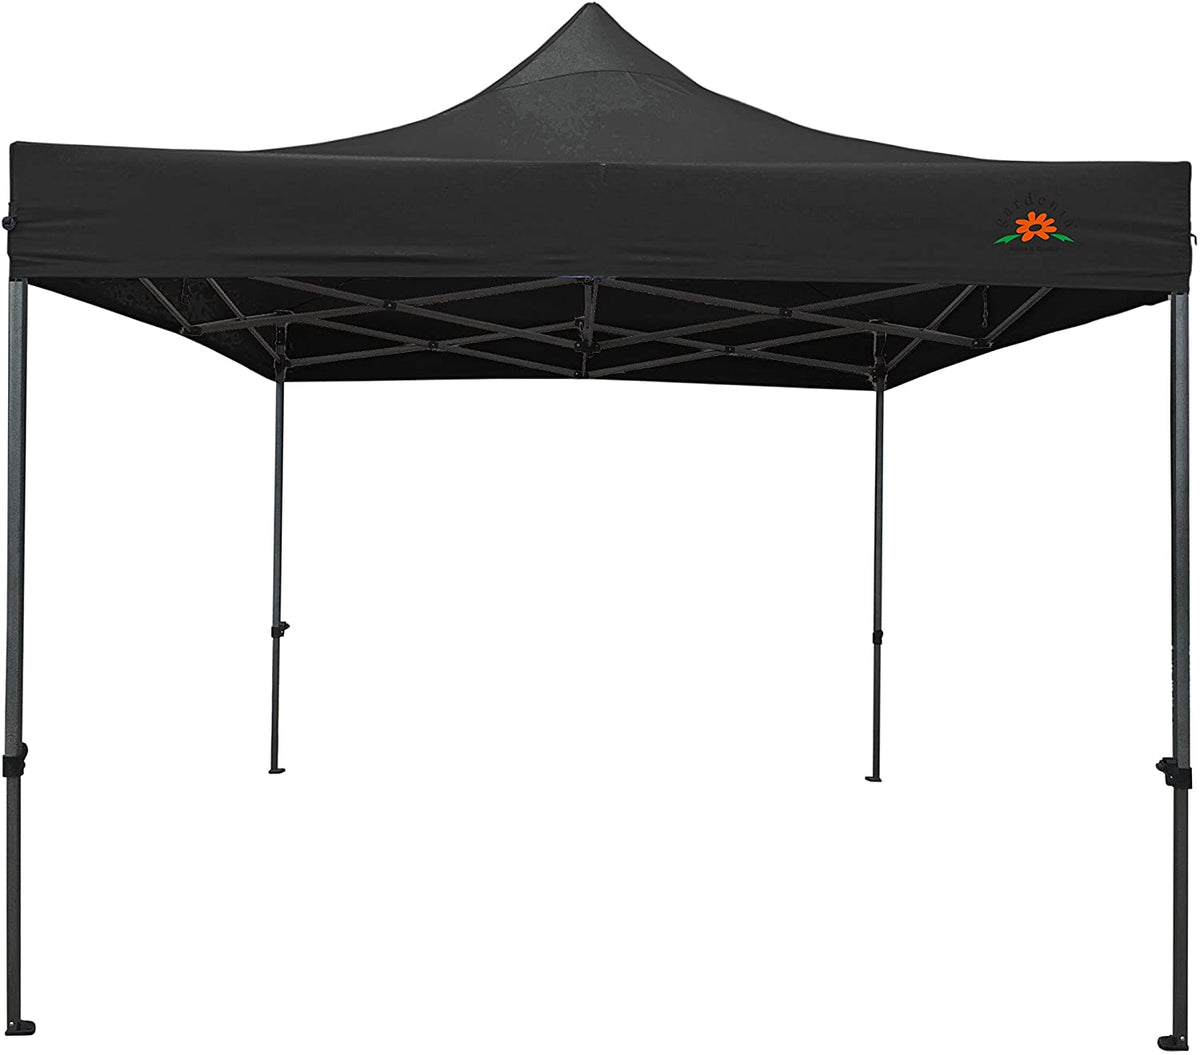 Pop up Canopy Tent 8x8 Gazebo Roller Wheel Bag Heavy Duty Outdoor Easy Folding Instant Sun Shade for Party Event Wedding Sports Recreational &amp; Commercial use Portable Quick Sun Shelter Pro-S15000-D